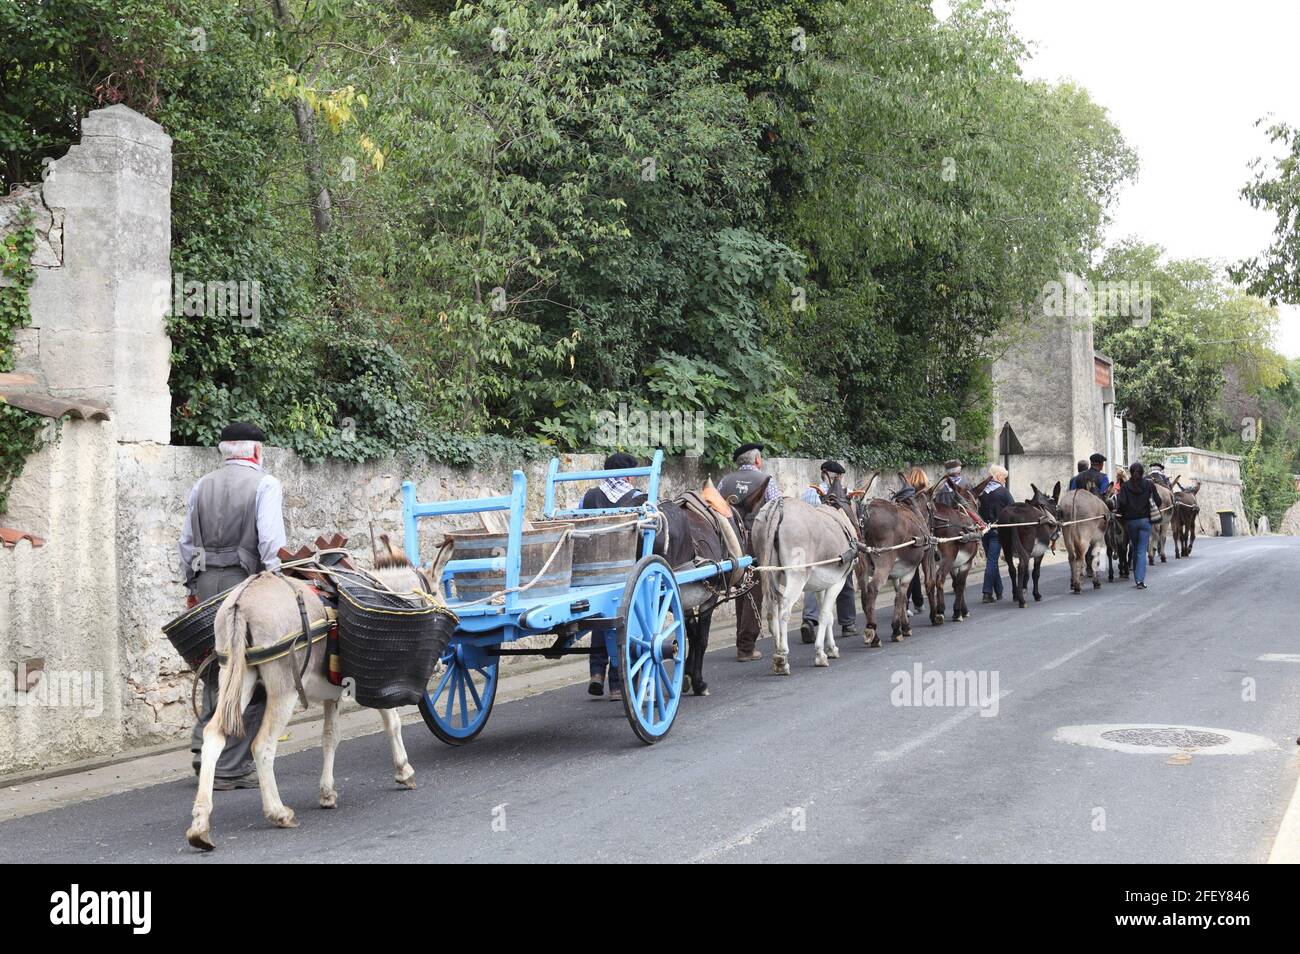 Grape harvest festival with villagers in traditional dress, donkeys and panniers of grapes, parade through St Christol, Pays de Lunel, L'Herault, Occitania, Languedoc Roussillon, France Stock Photo